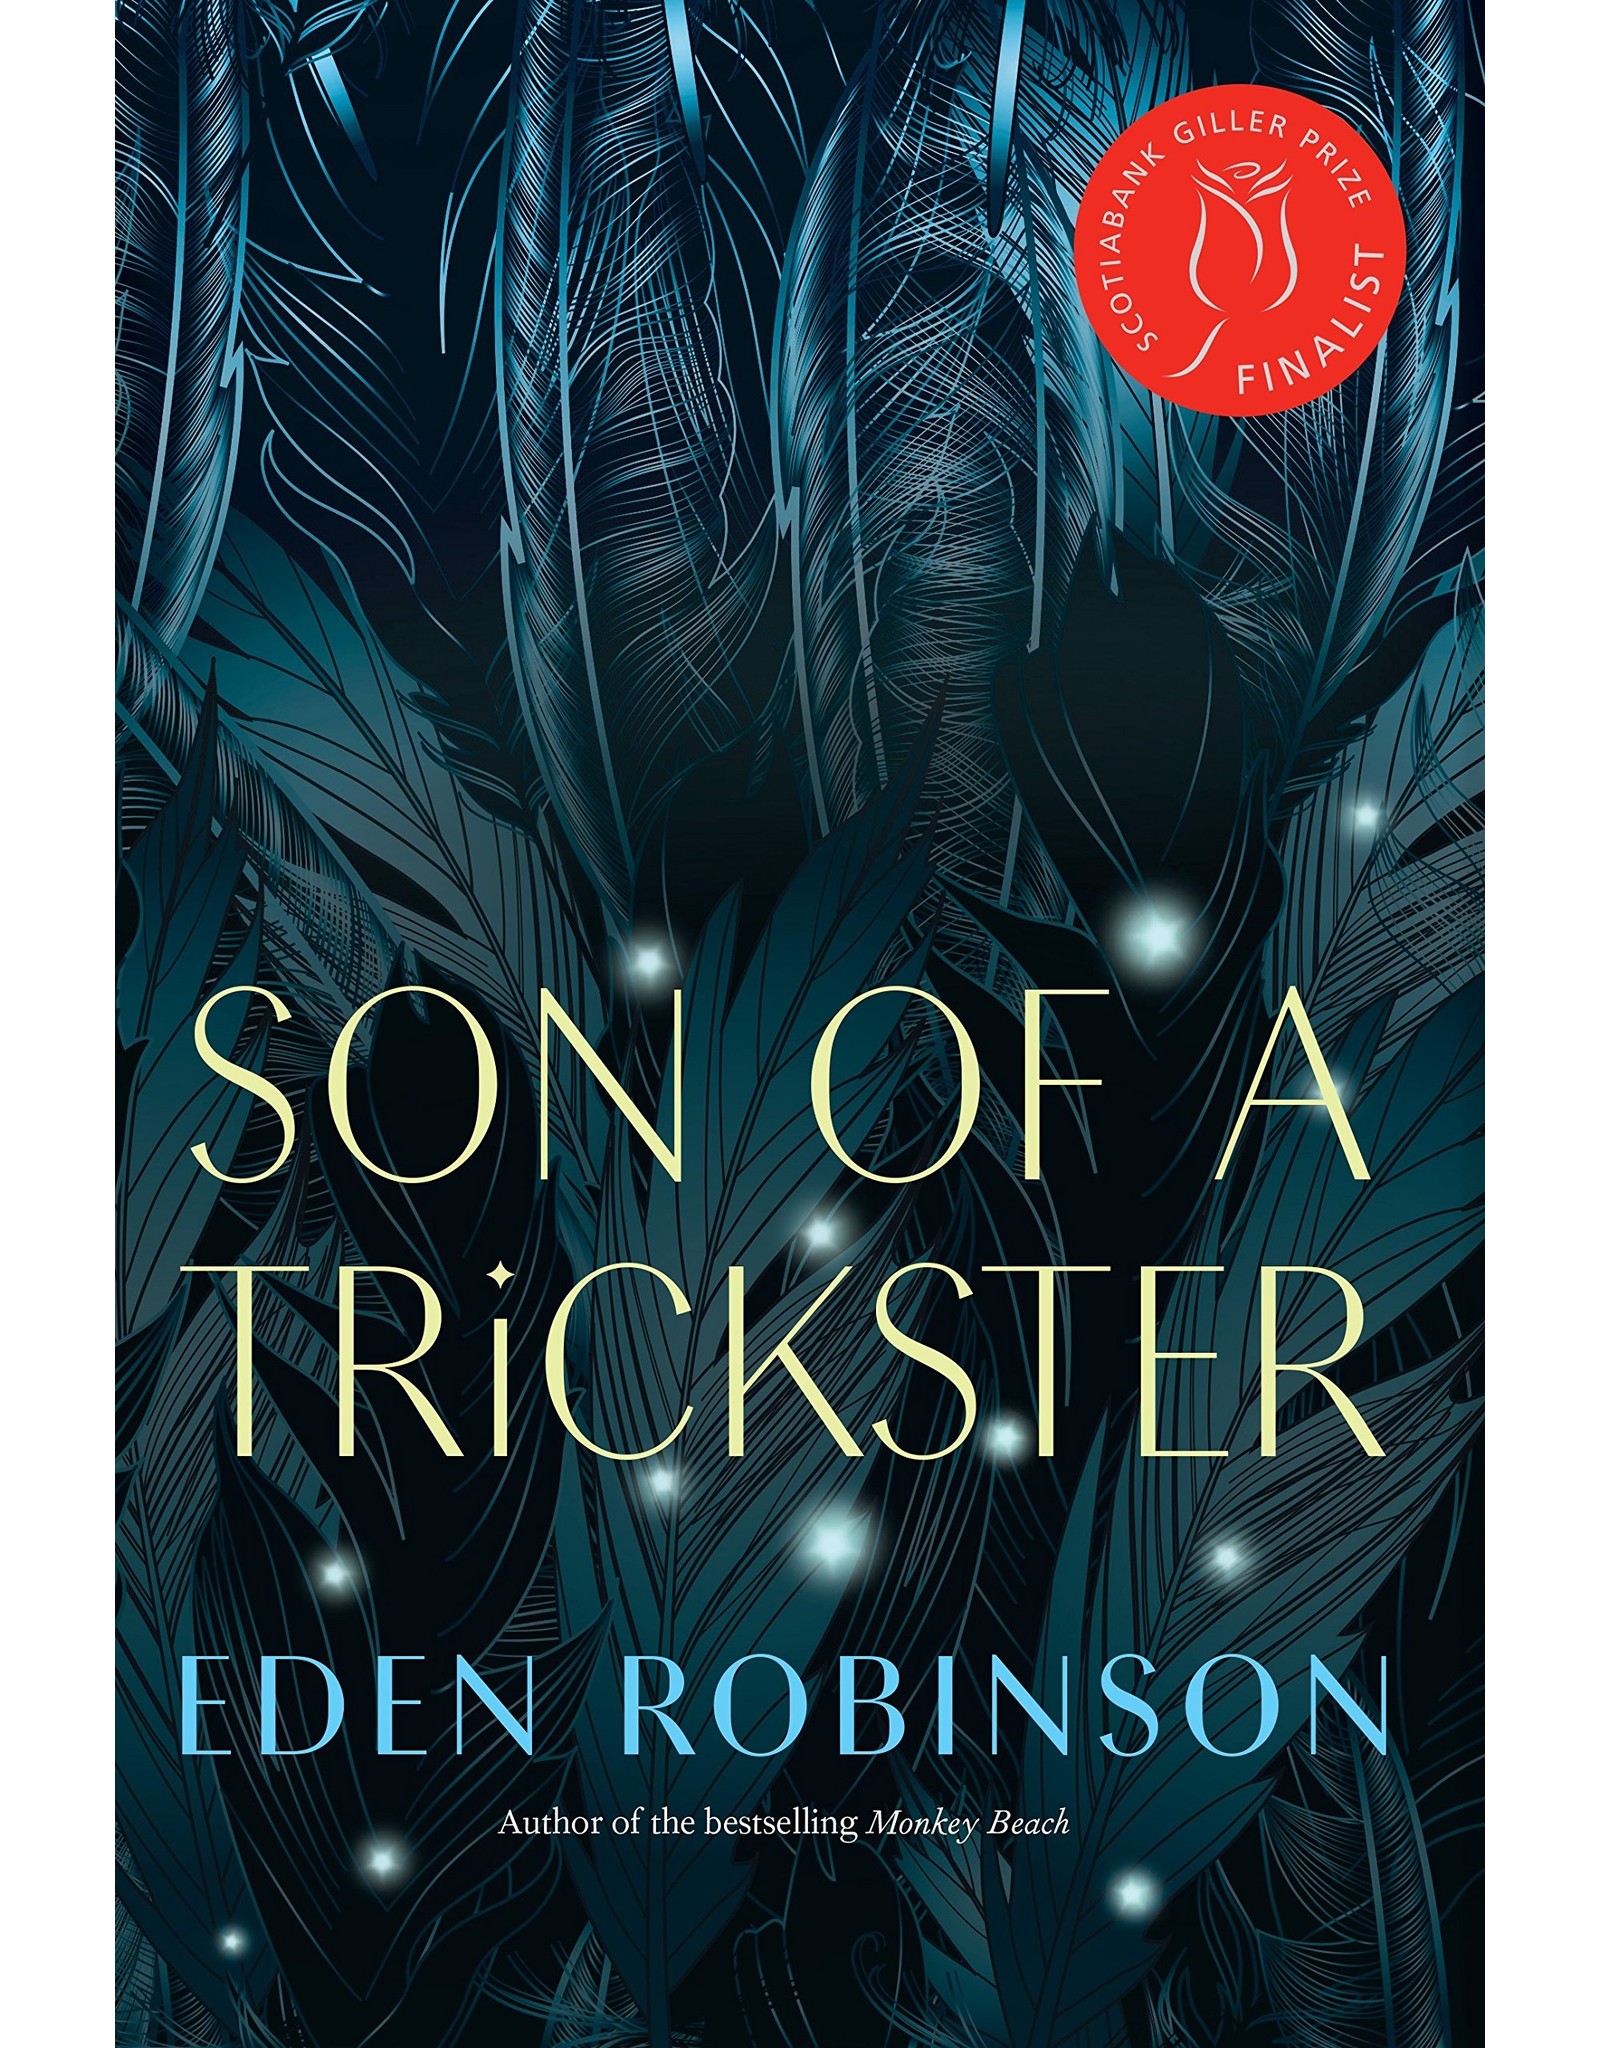 Image for "Son of a Trickster"